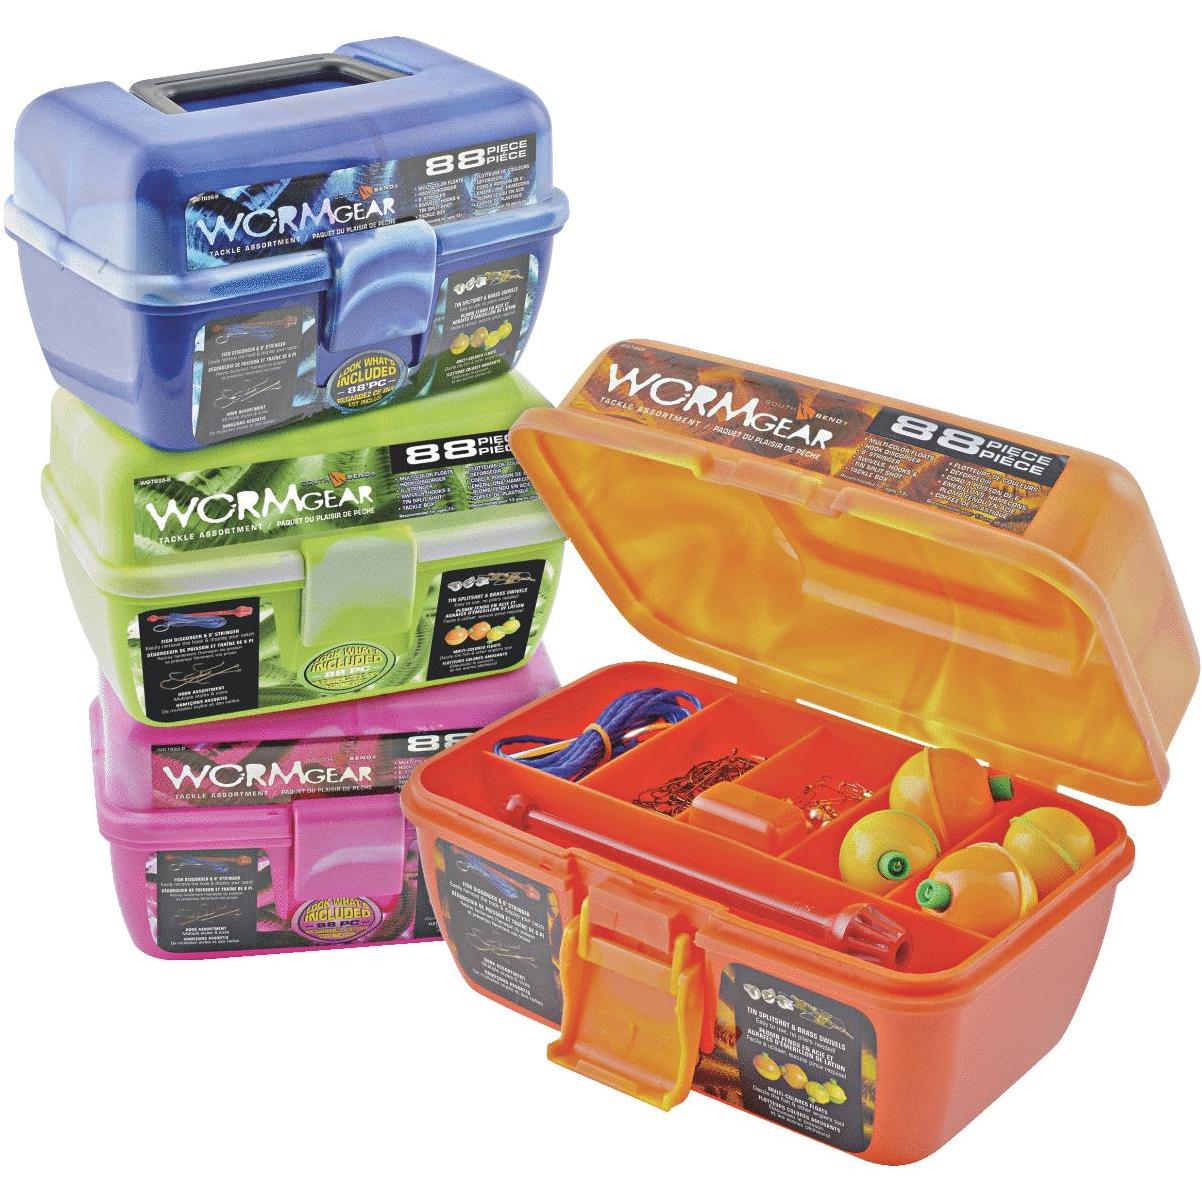 South Bend Worm Gear Tackle Box 88 Piece